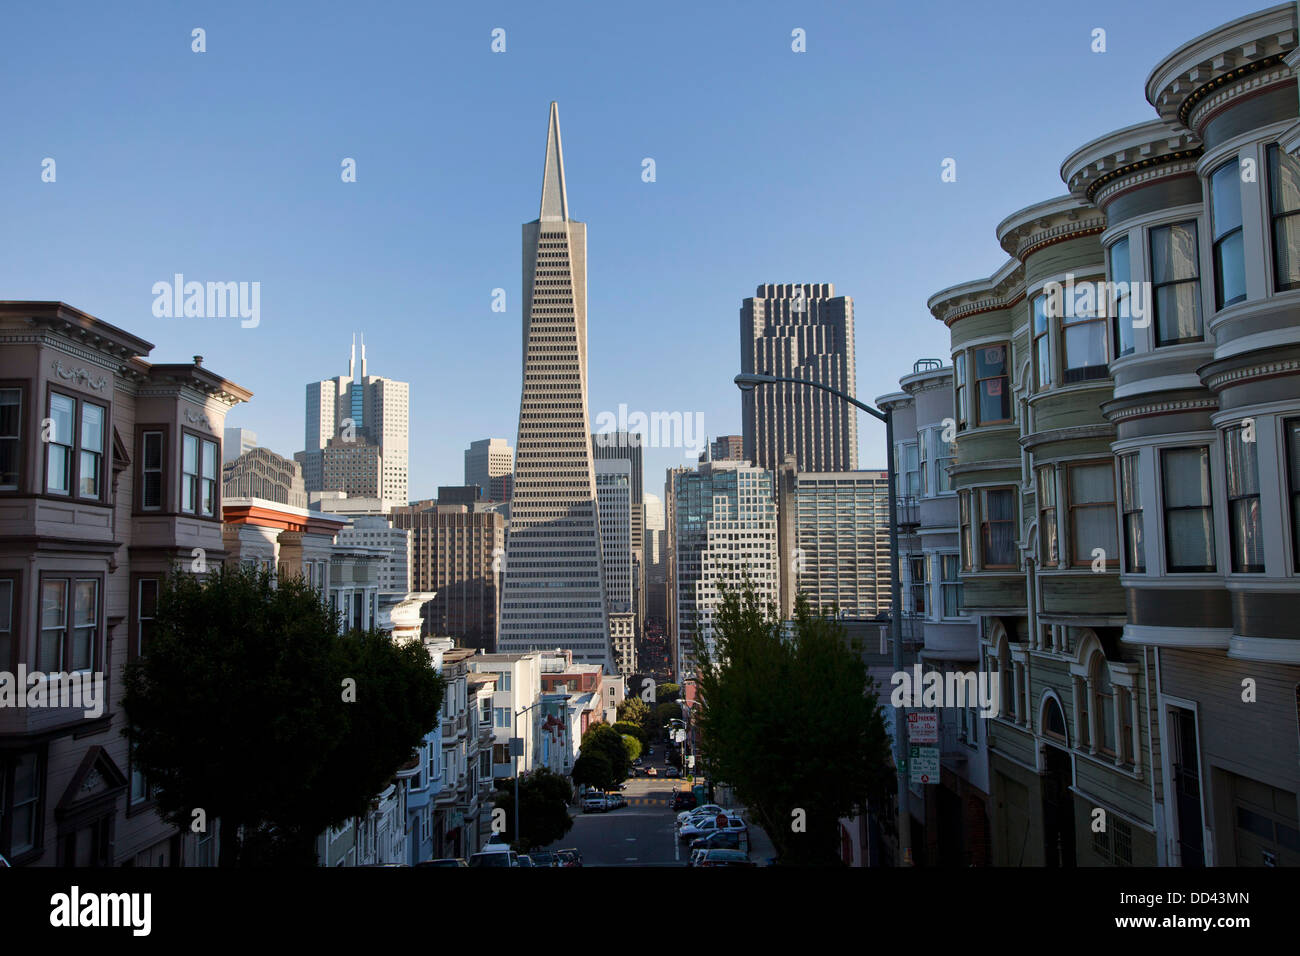 The Transamerica Pyramid towers above the Financial District as seen from Telegraph Hill in San Francisco, California. Stock Photo